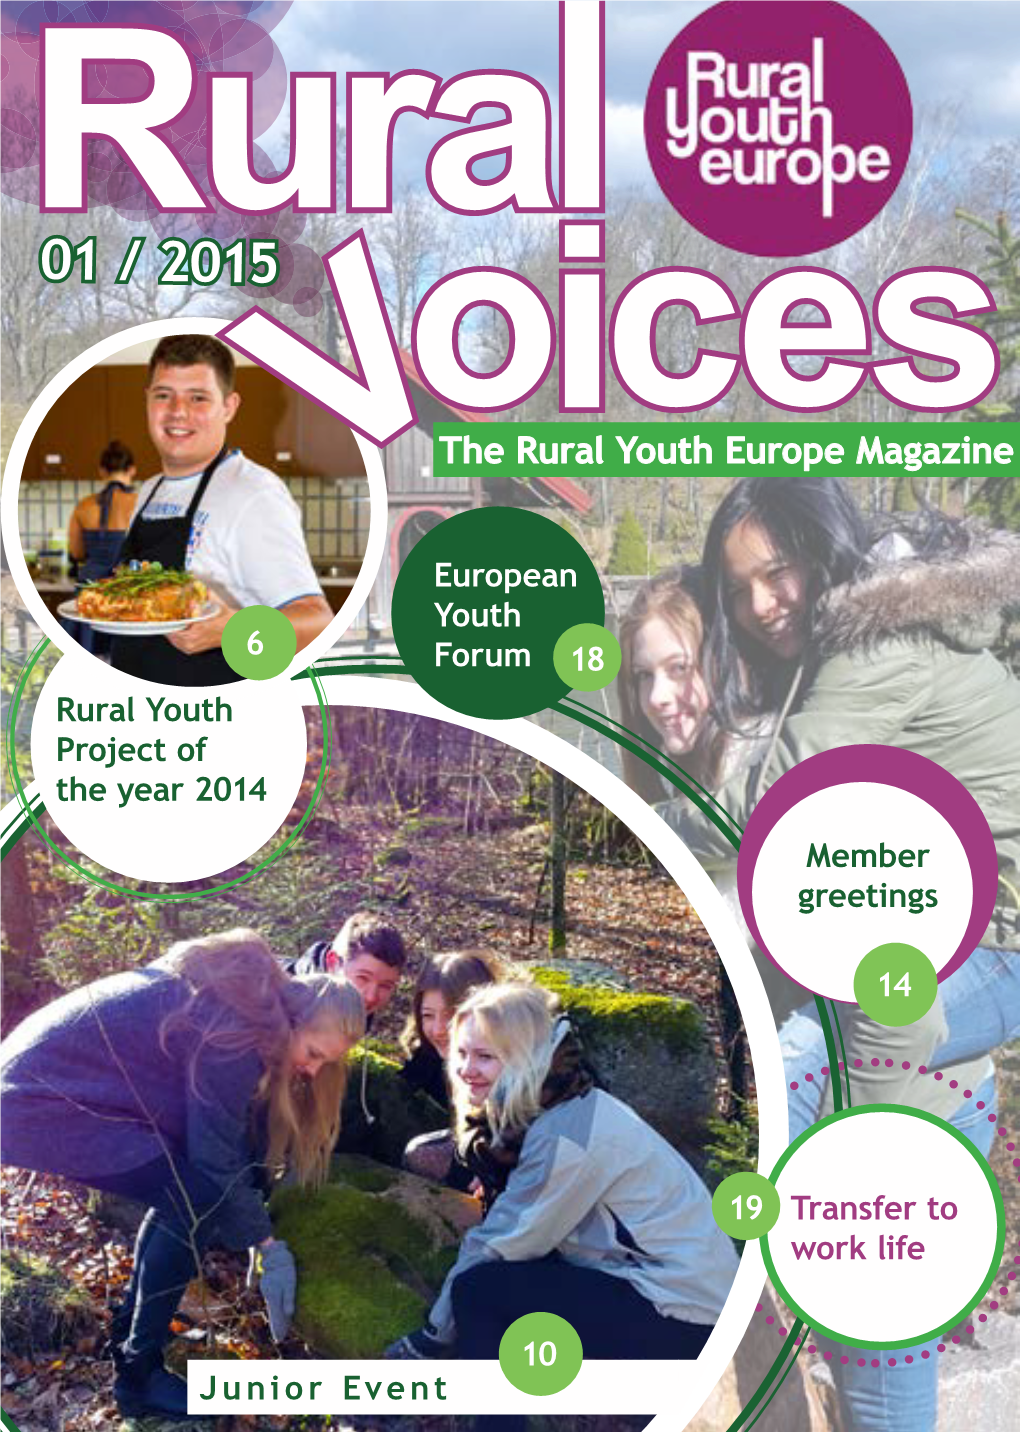 The Rural Youth Europe Magazine